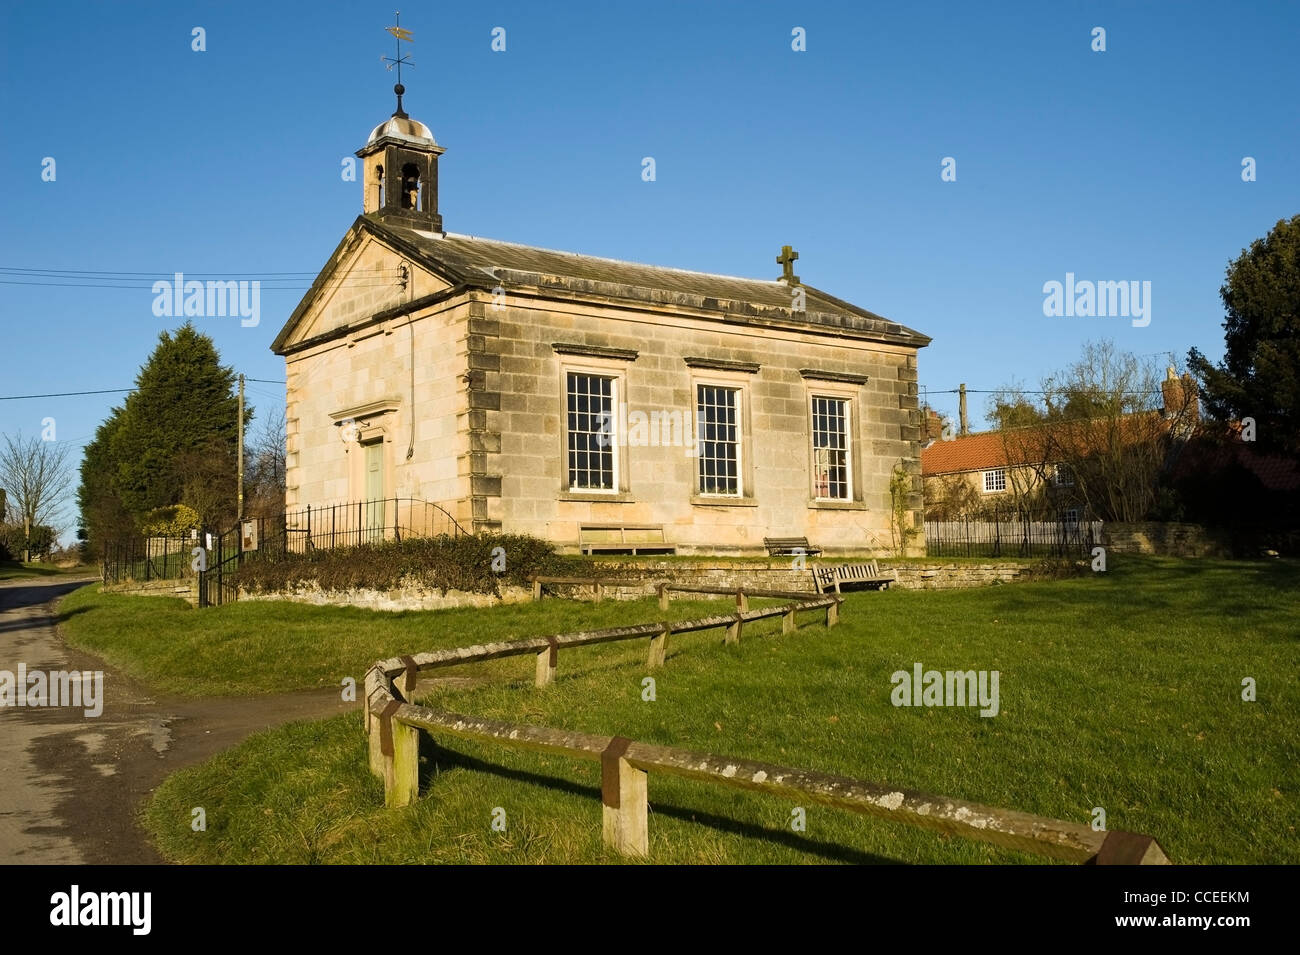 Small hamlet of Coneysthorpe, part of the Castle Howard estate. Jan 2012 Stock Photo